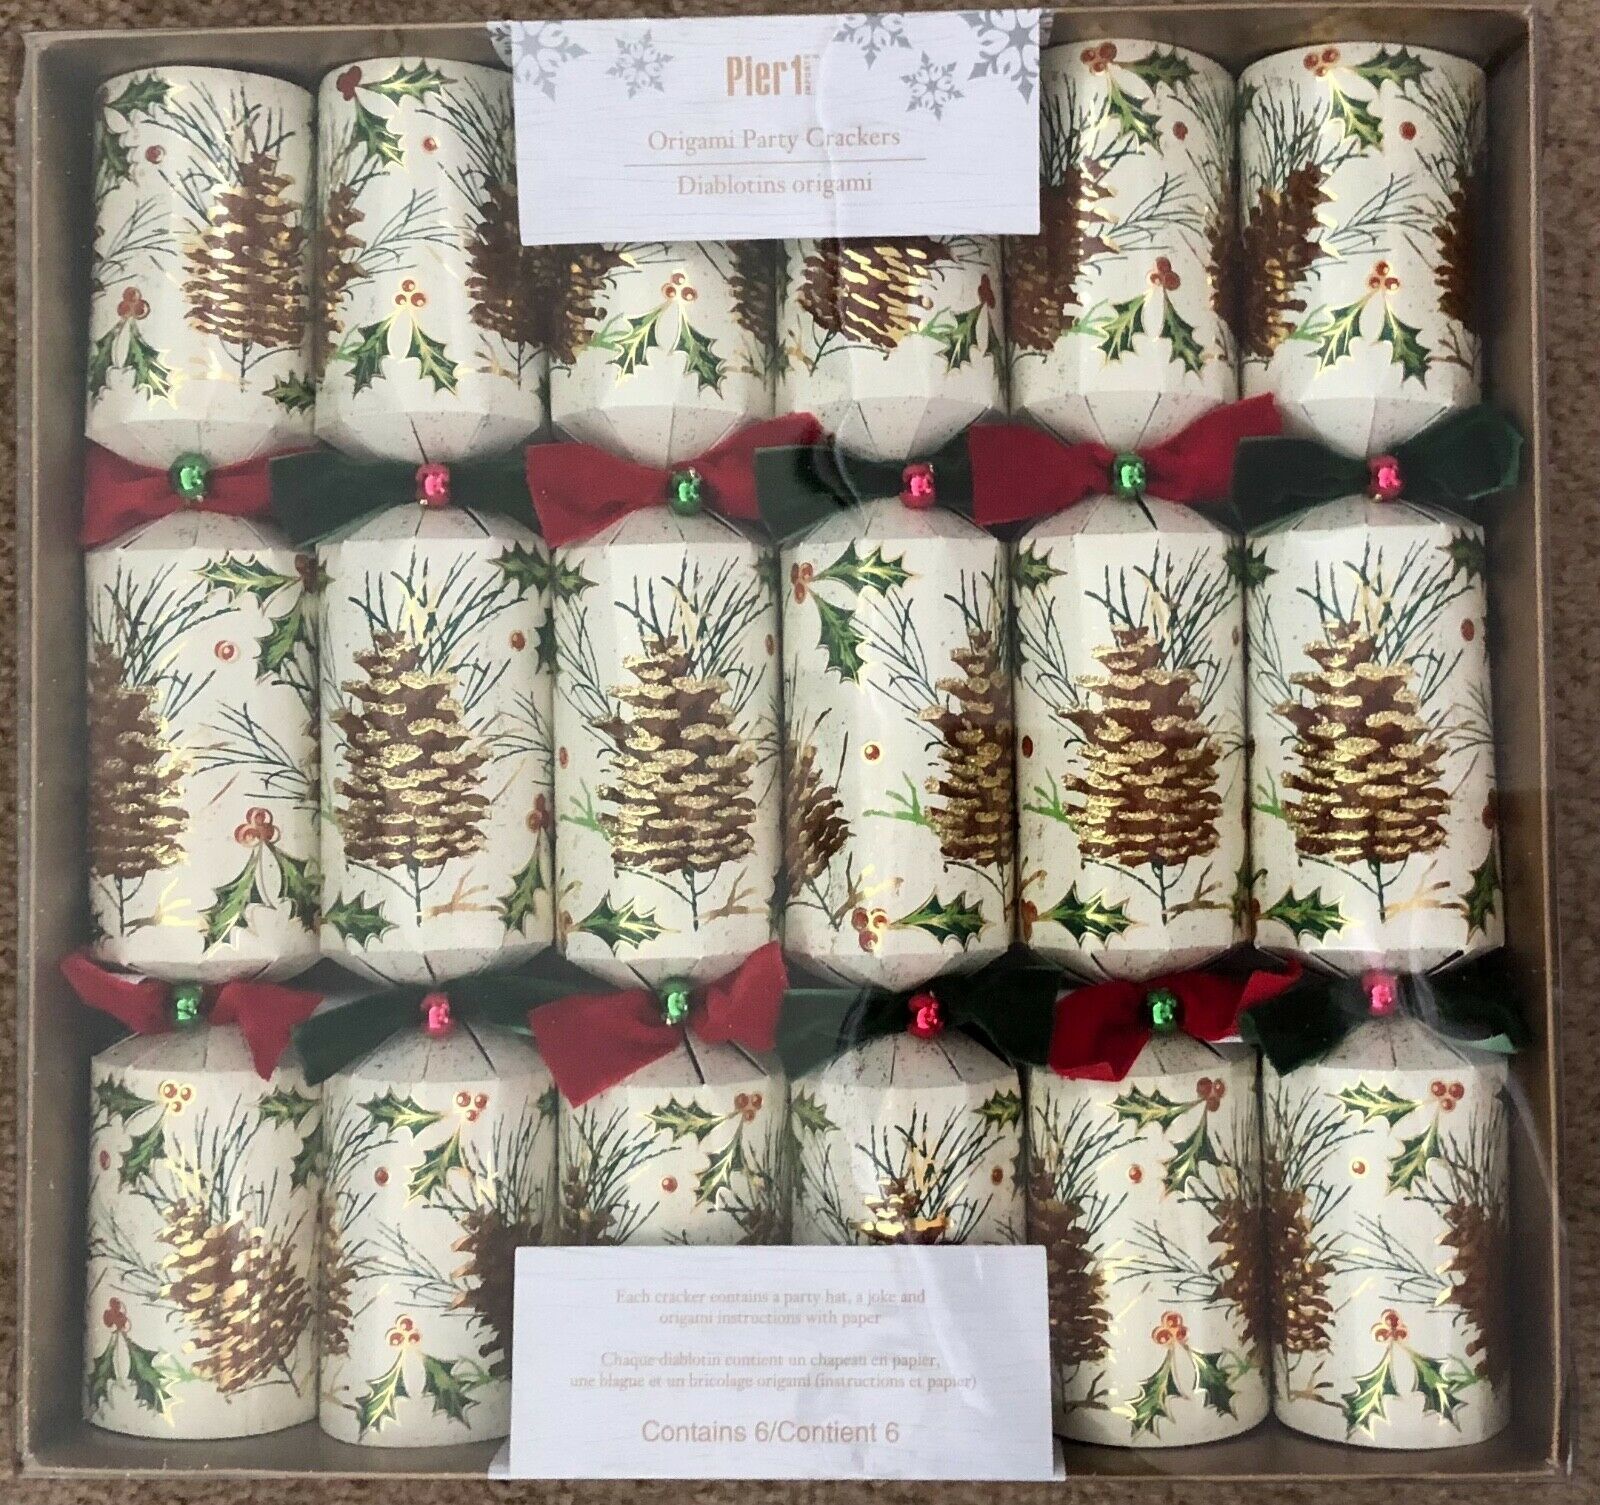 New Pier 1 Imports 6 Pc Christmas Holiday Origami large Party crackers acorn - $29.65